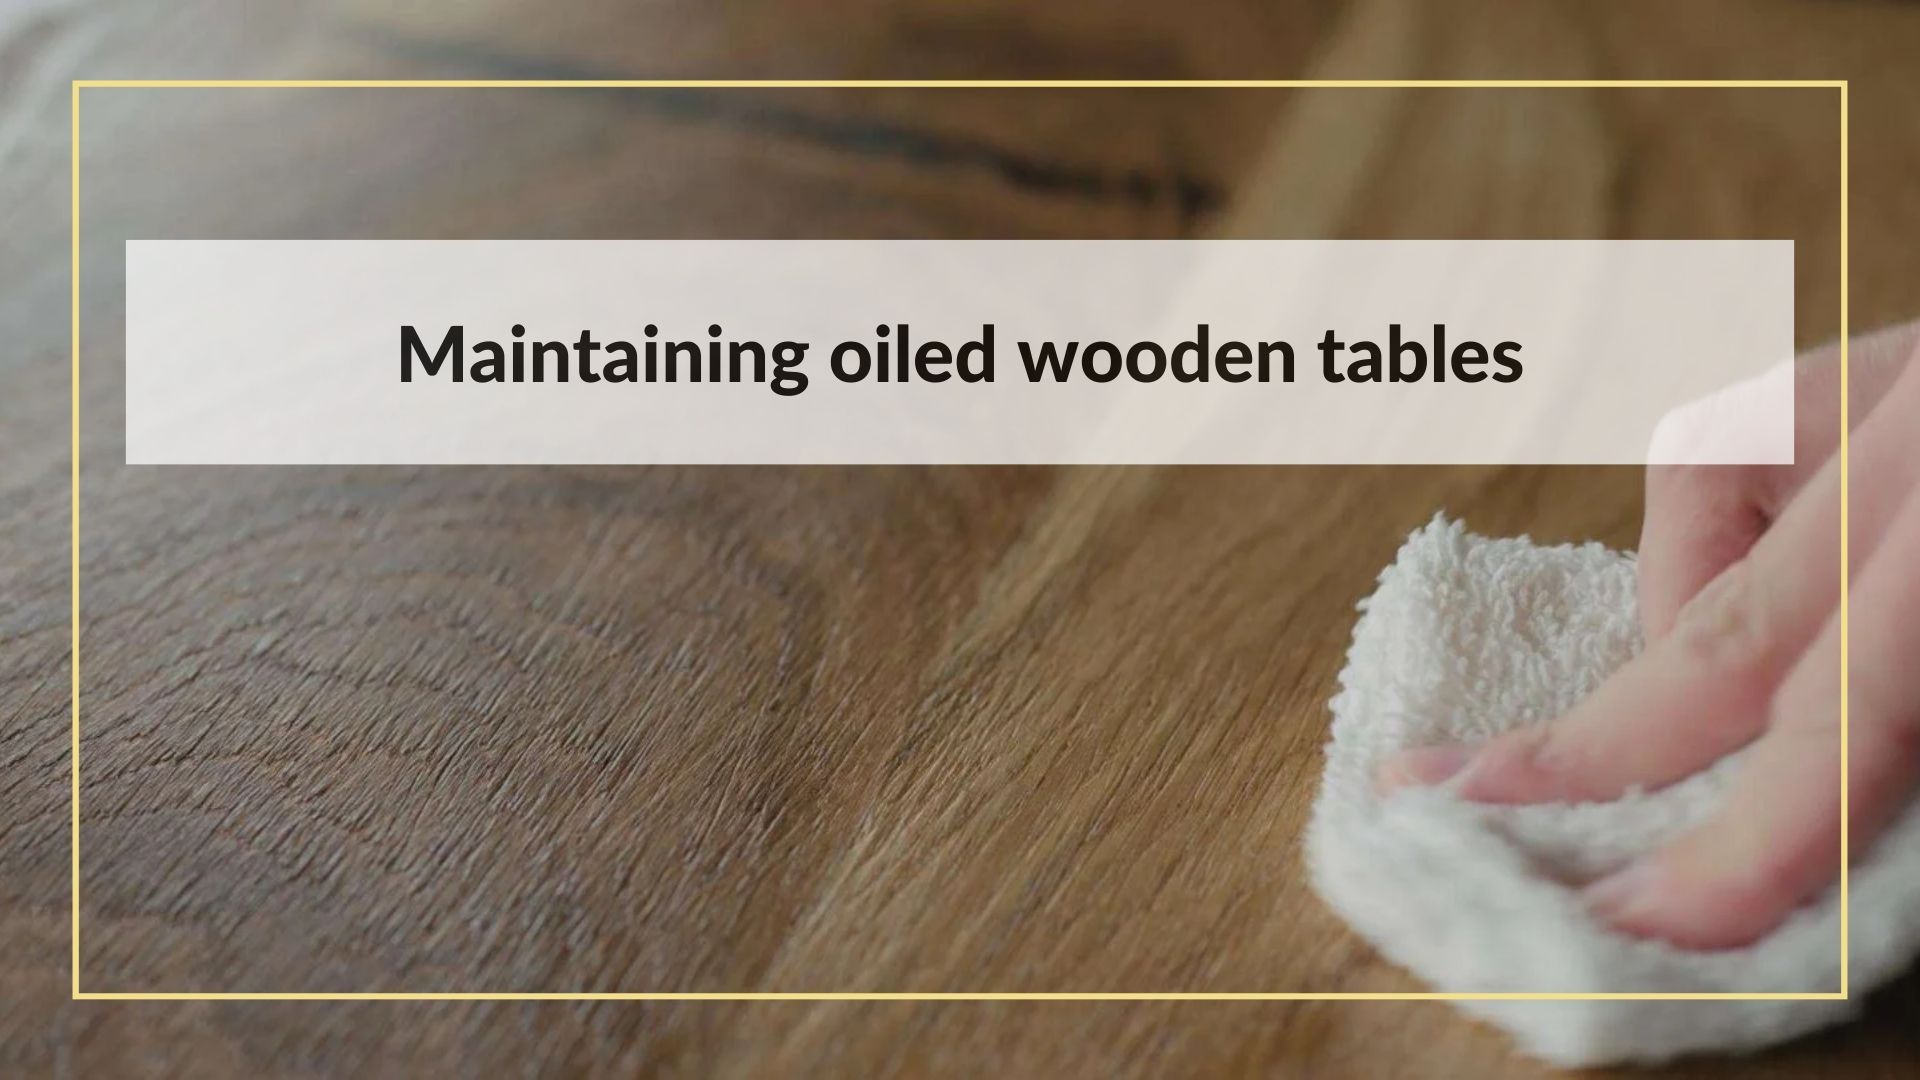 Maintaining oiled wooden tables